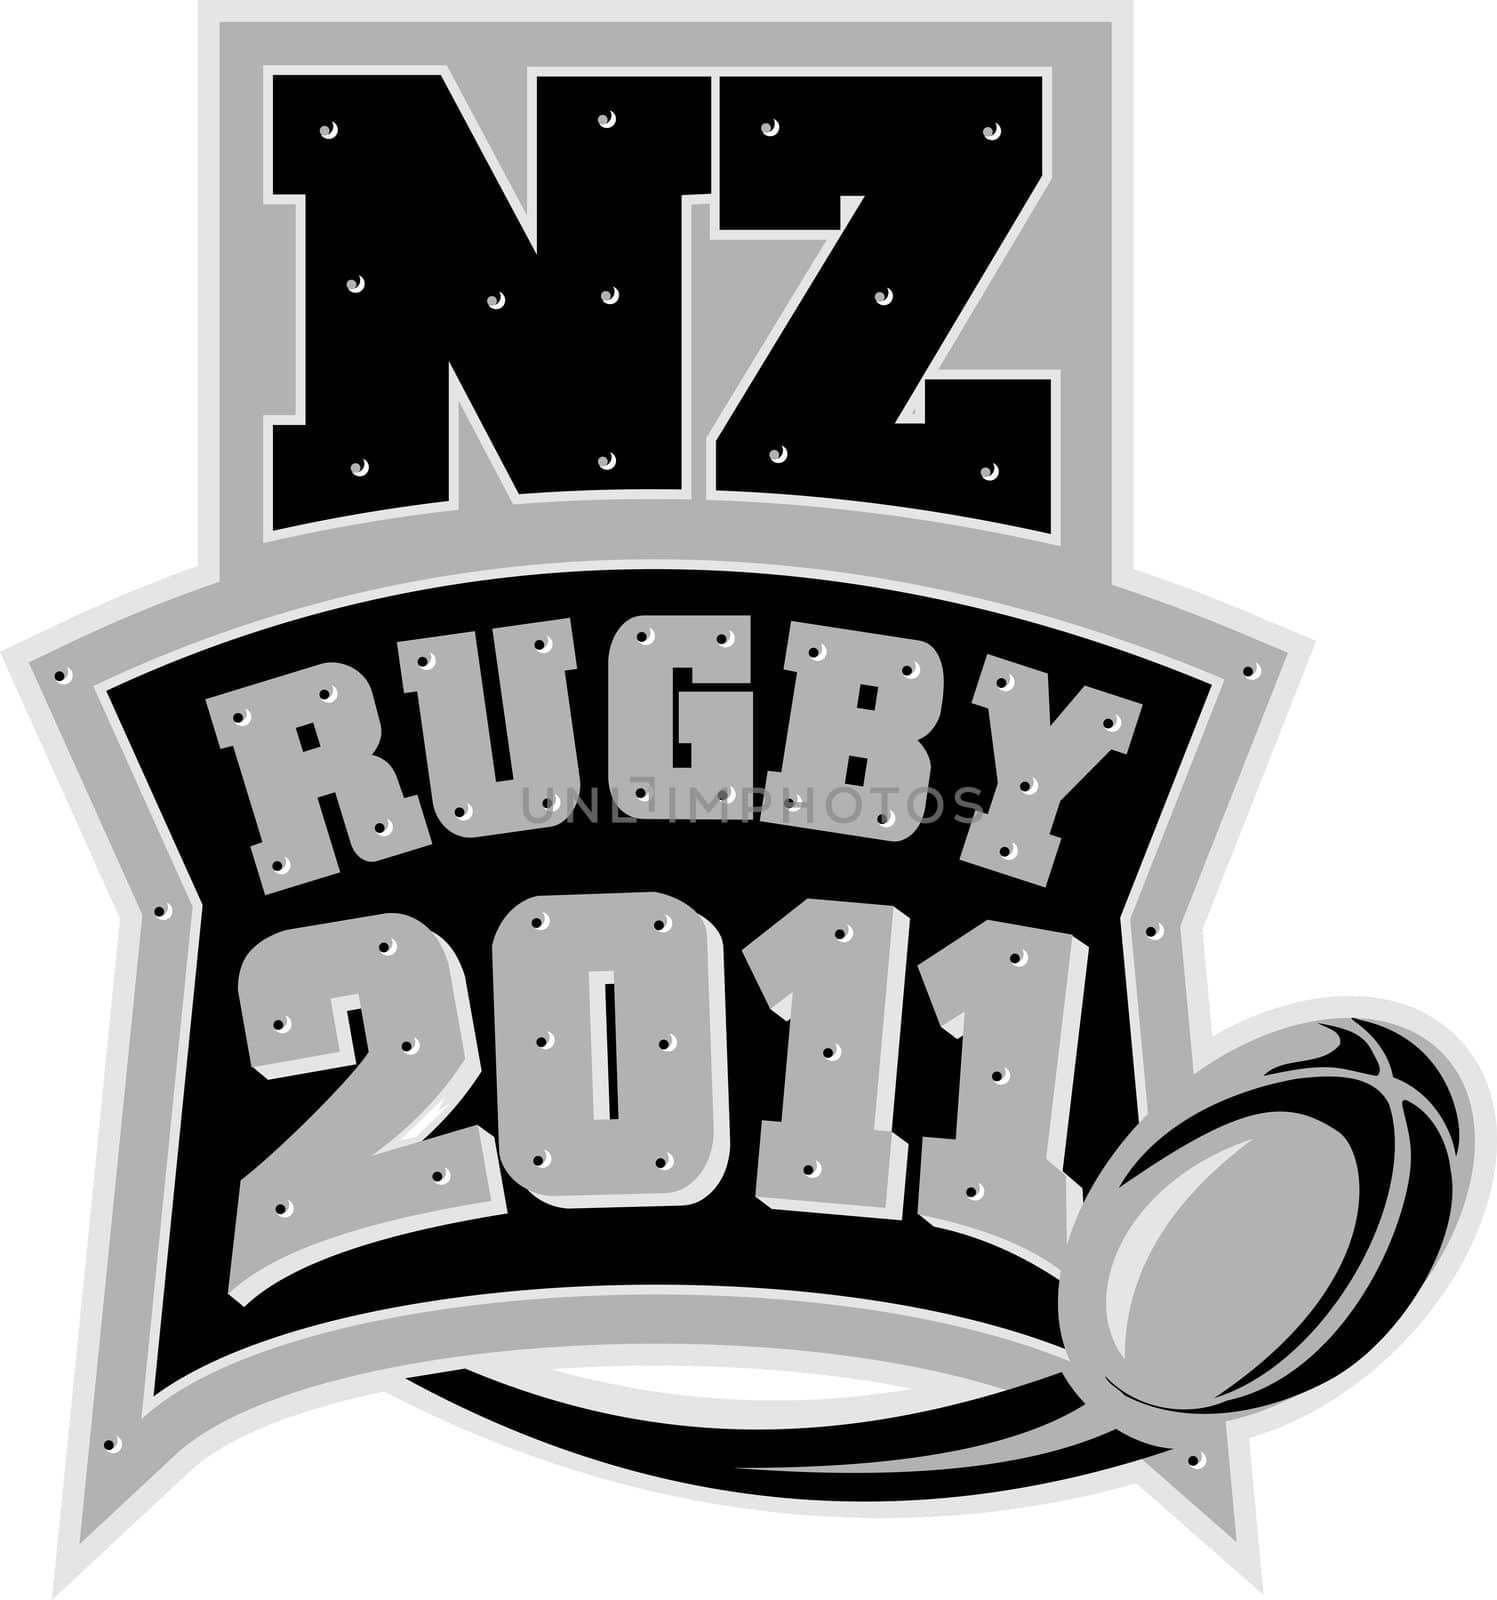 New Zealand Rugby 2011 with ball  by patrimonio